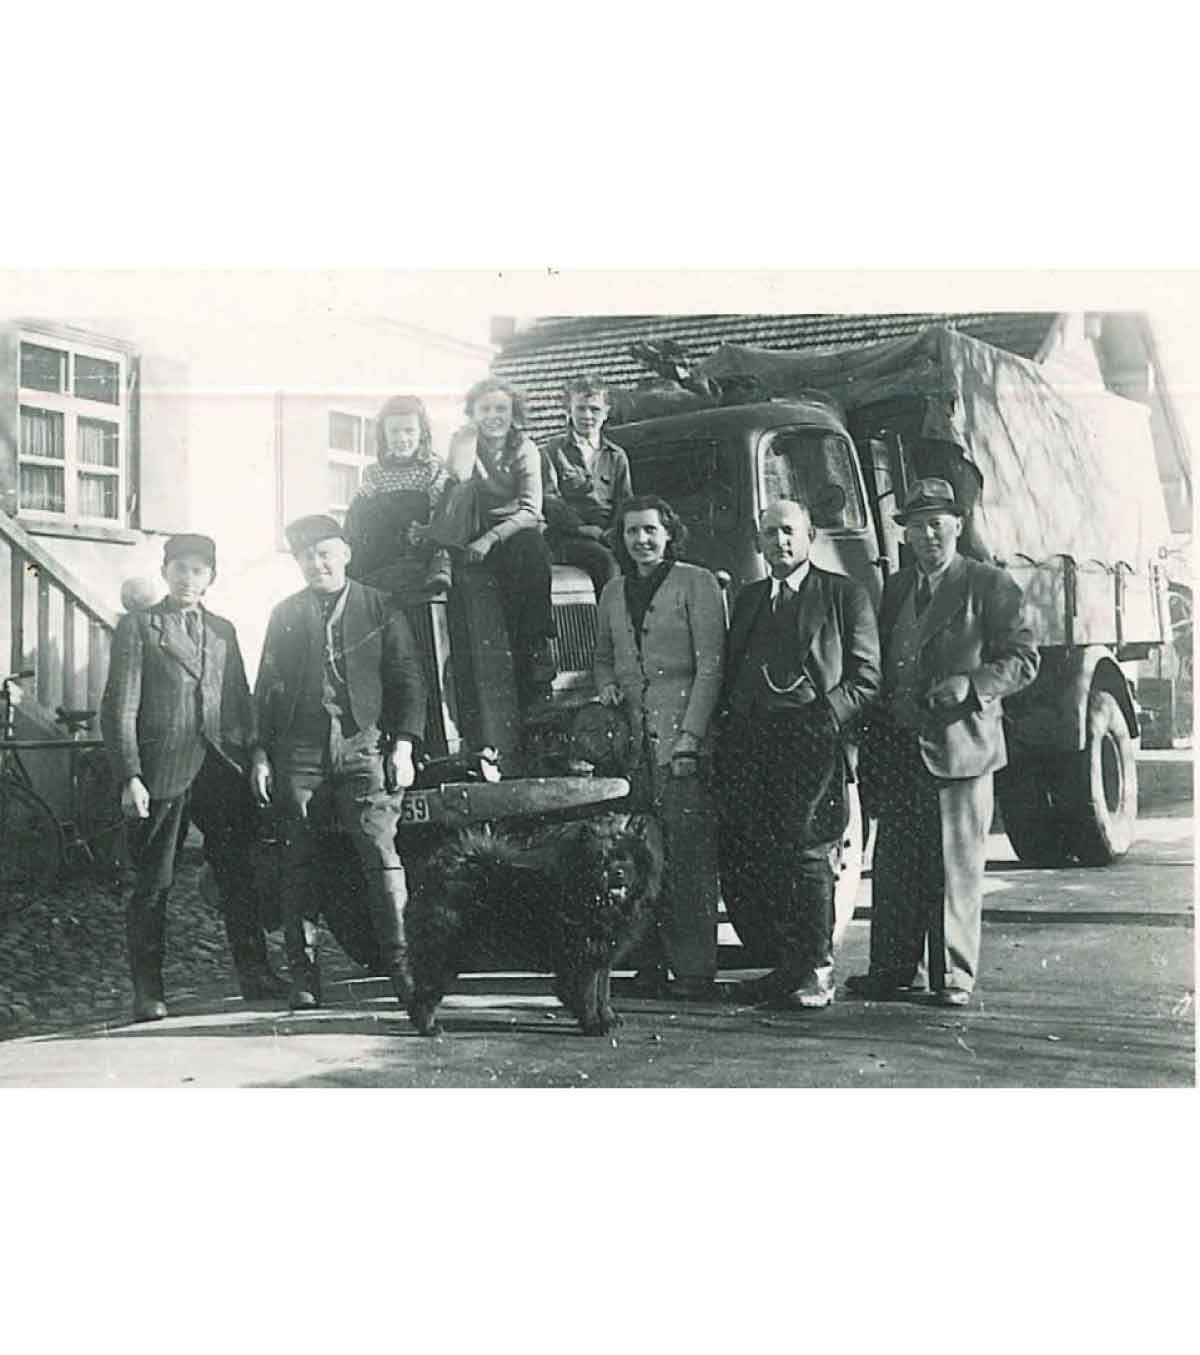 Rudi Howald (Nadia’s great-grandfather) and his children together with their driver, operating manager, a friend of the family and Rudi’s brother, standing in front of the truck that the family us | Photo: © private